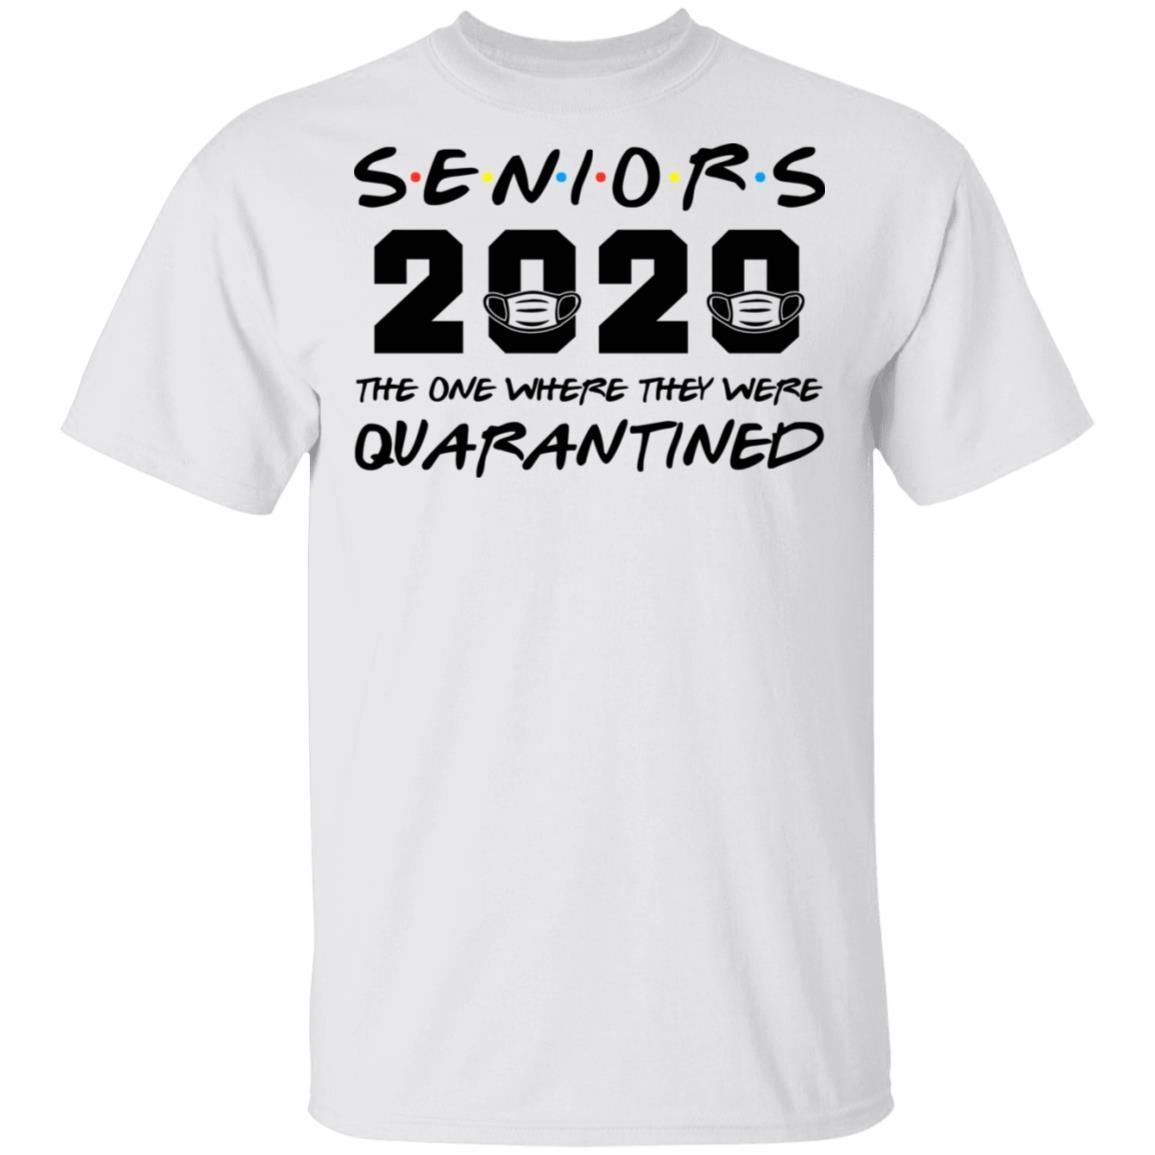 Seniors 2020 The One Where They Were Quarantined shirts